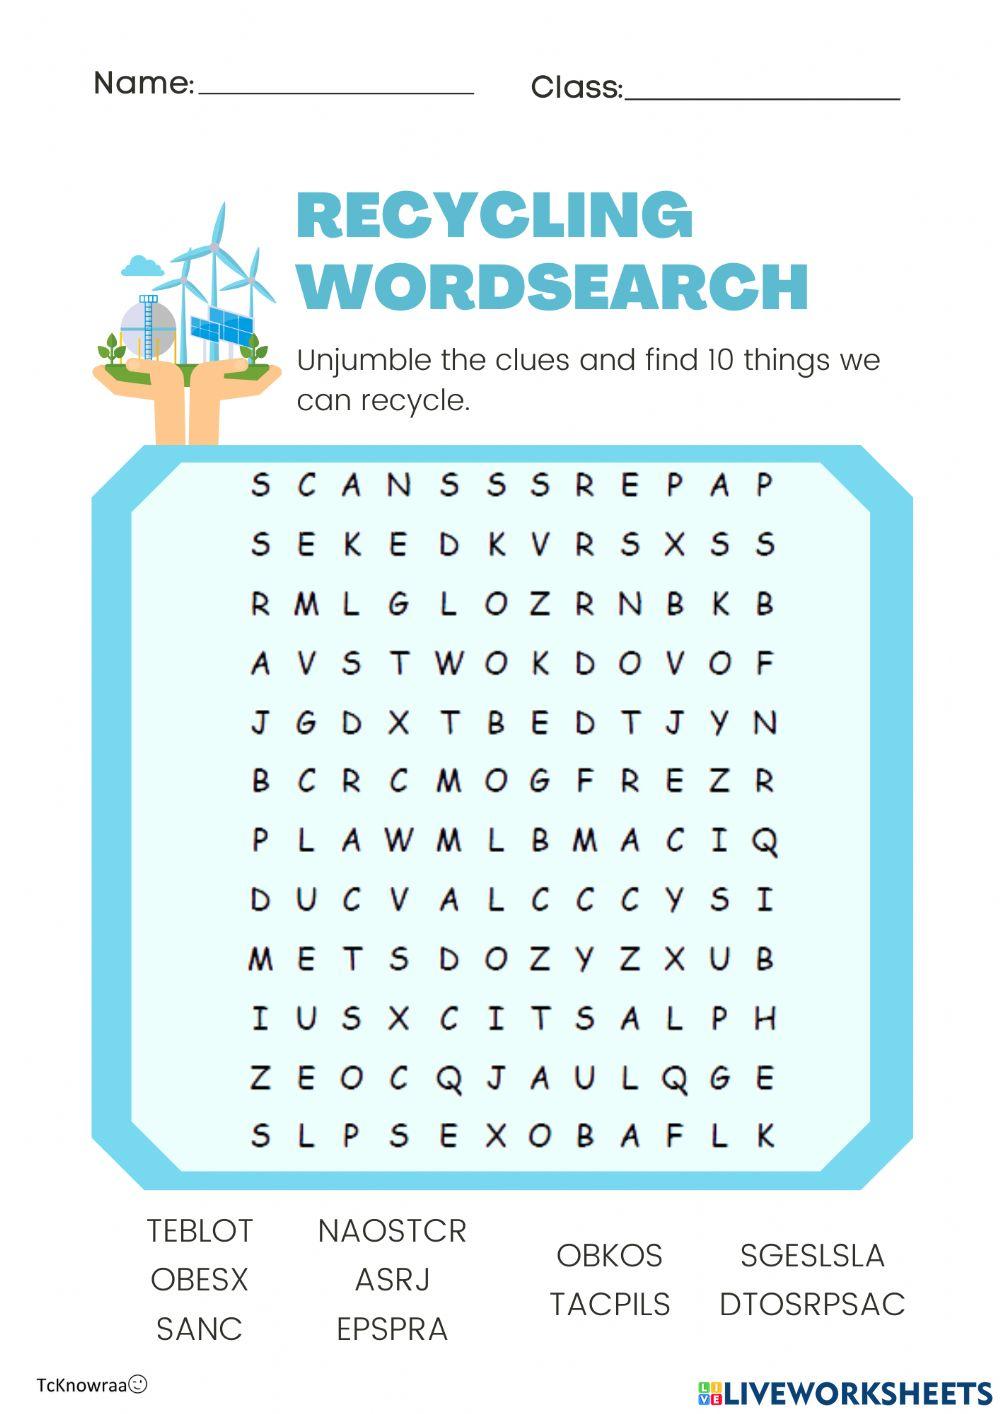 Recycling Wordsearch